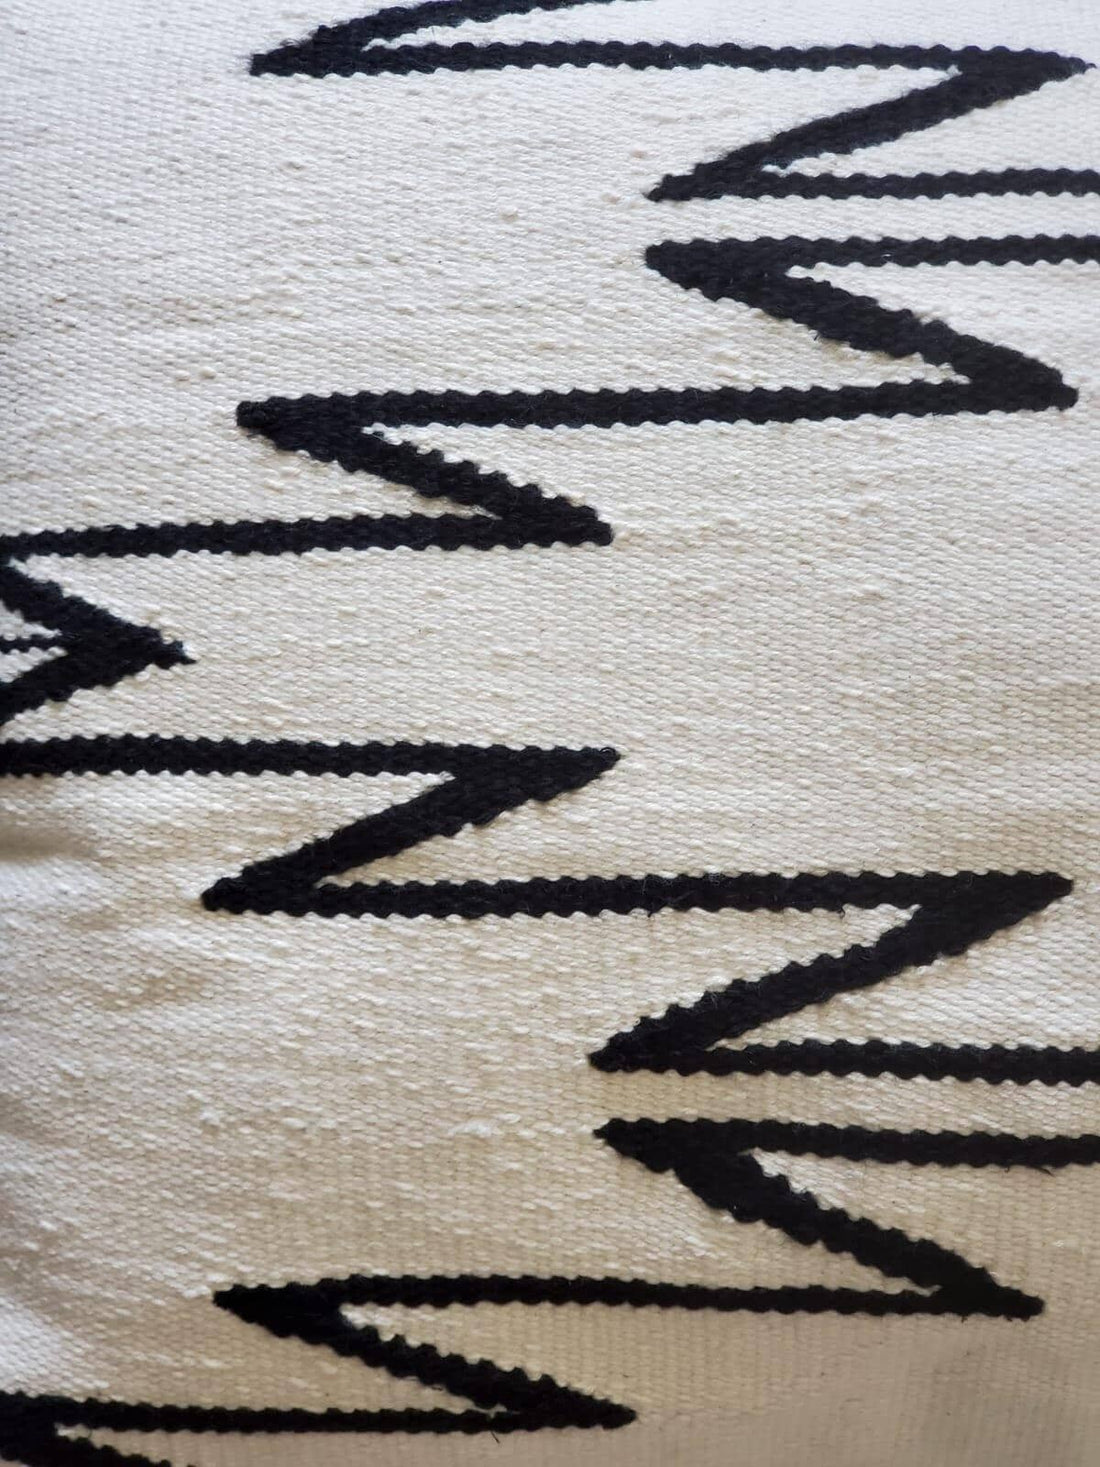 Handwoven decorative black and white cushions